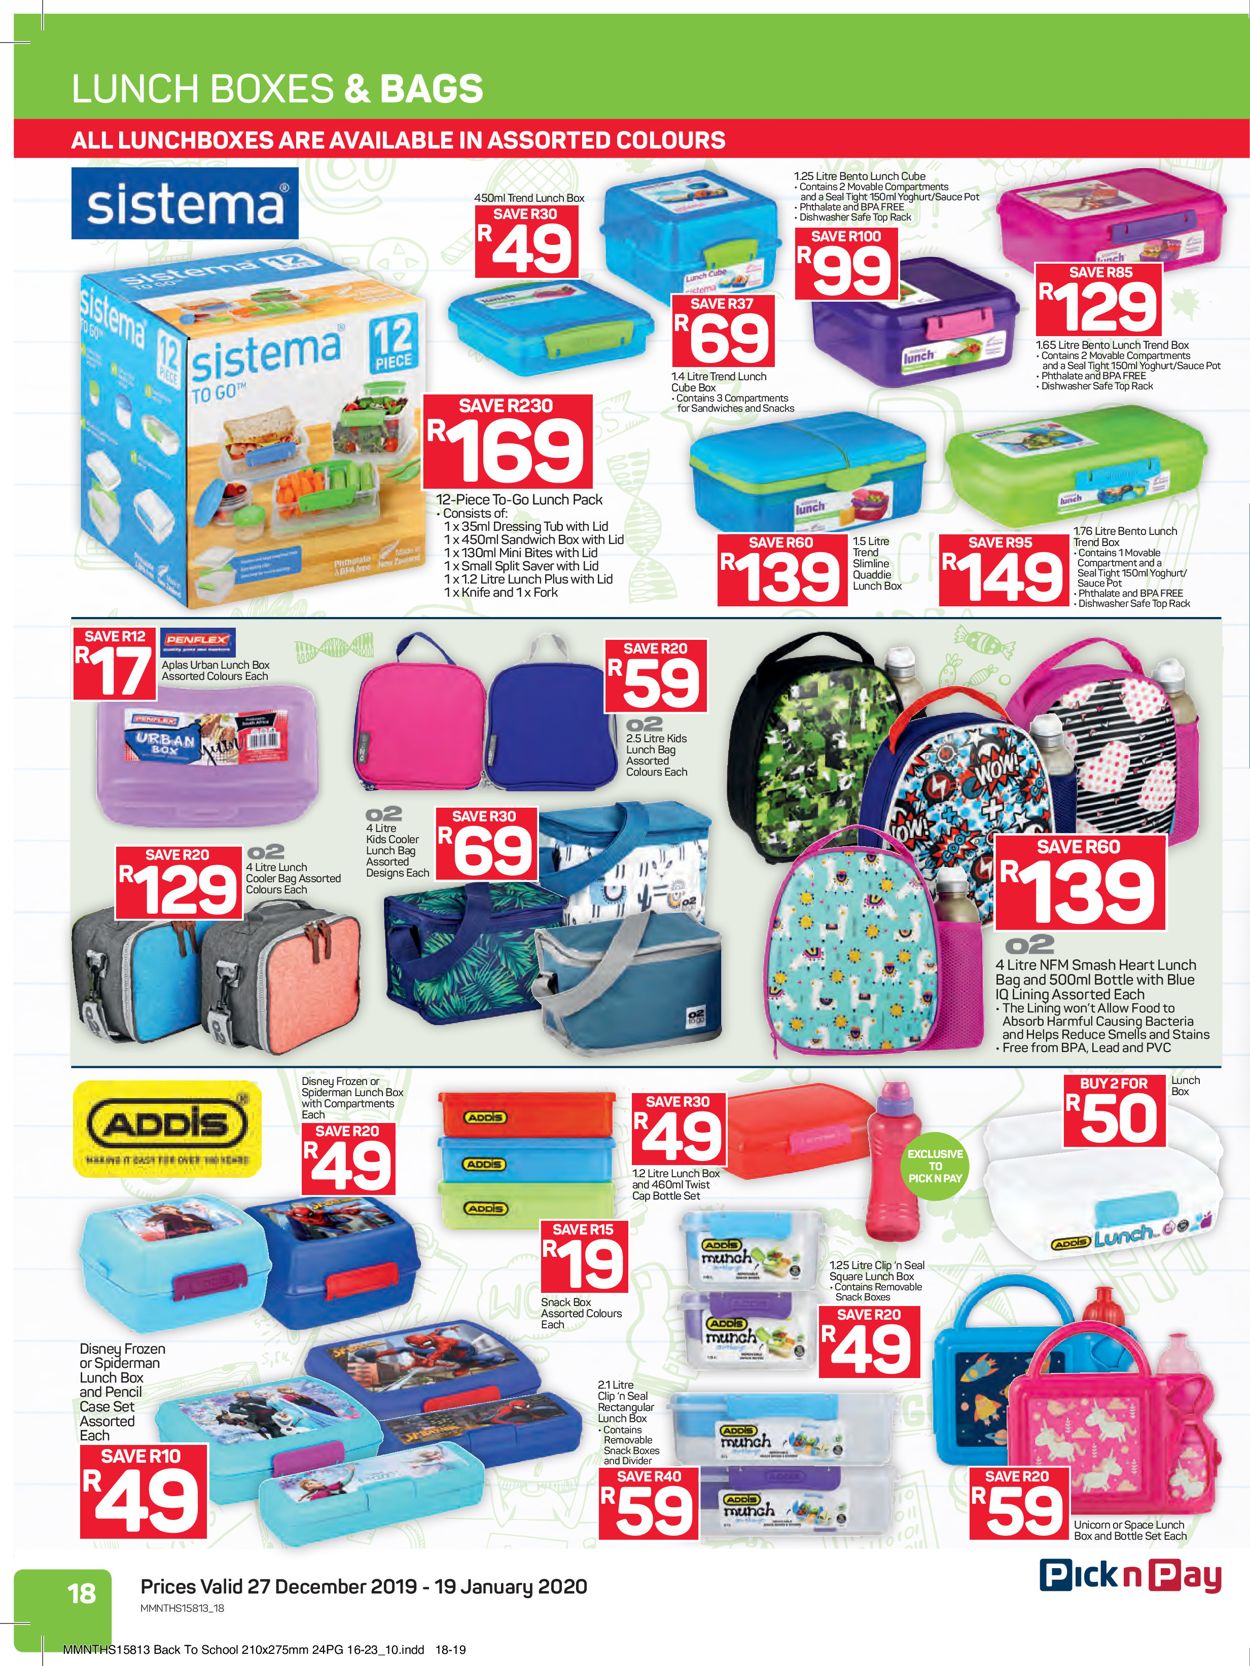 Pick n Pay Back 2 School Catalogue - 2019/12/27-2020/01/19 (Page 19)